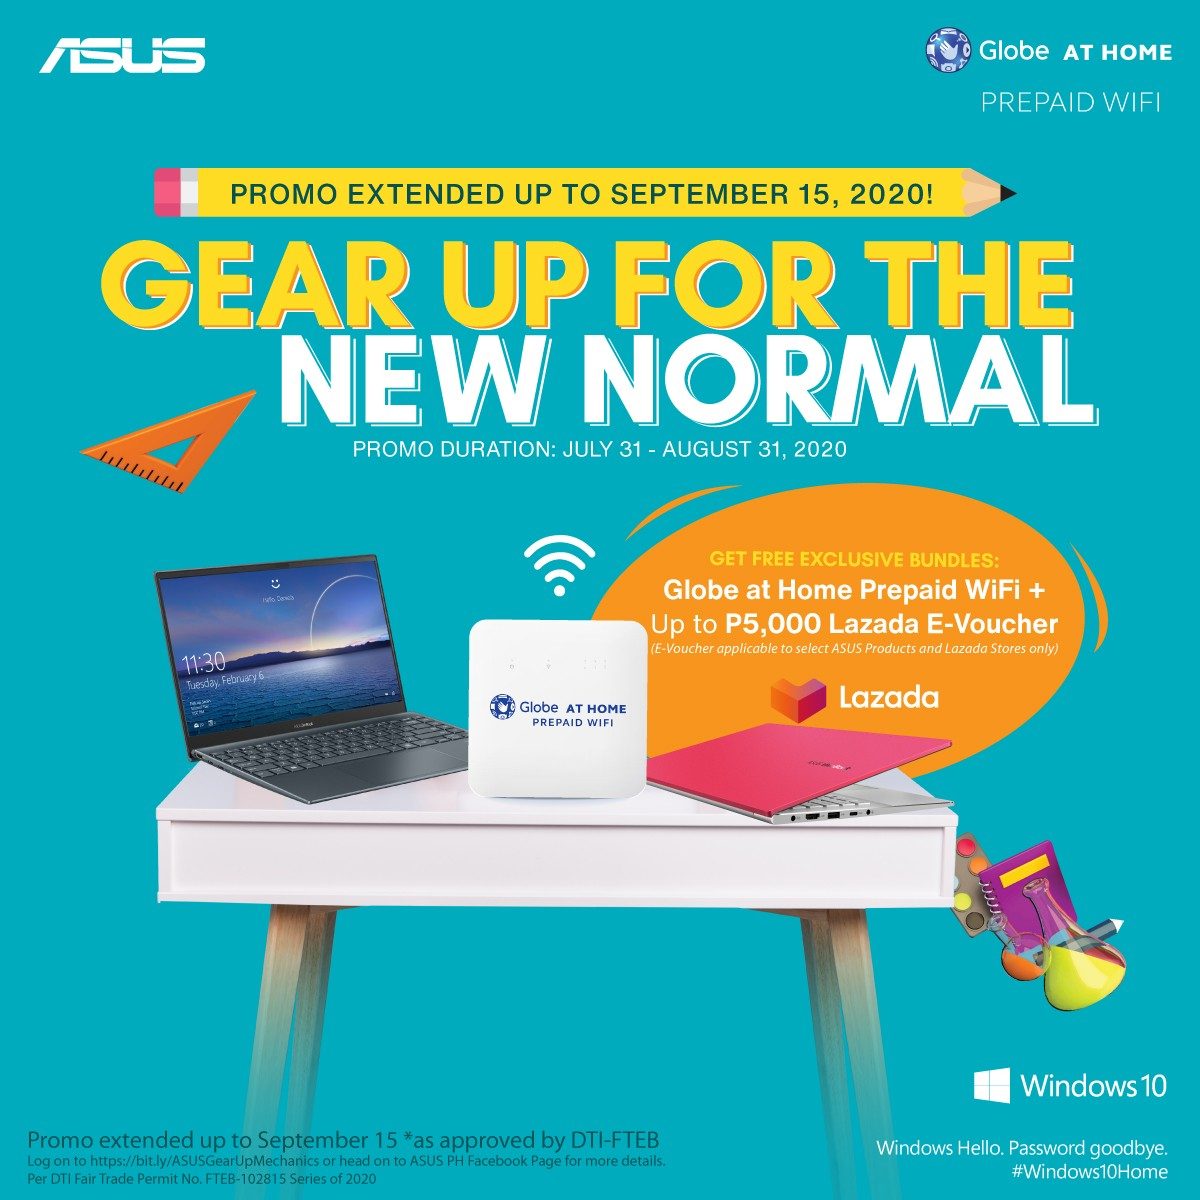 ASUS Philippines extends back to school promotions